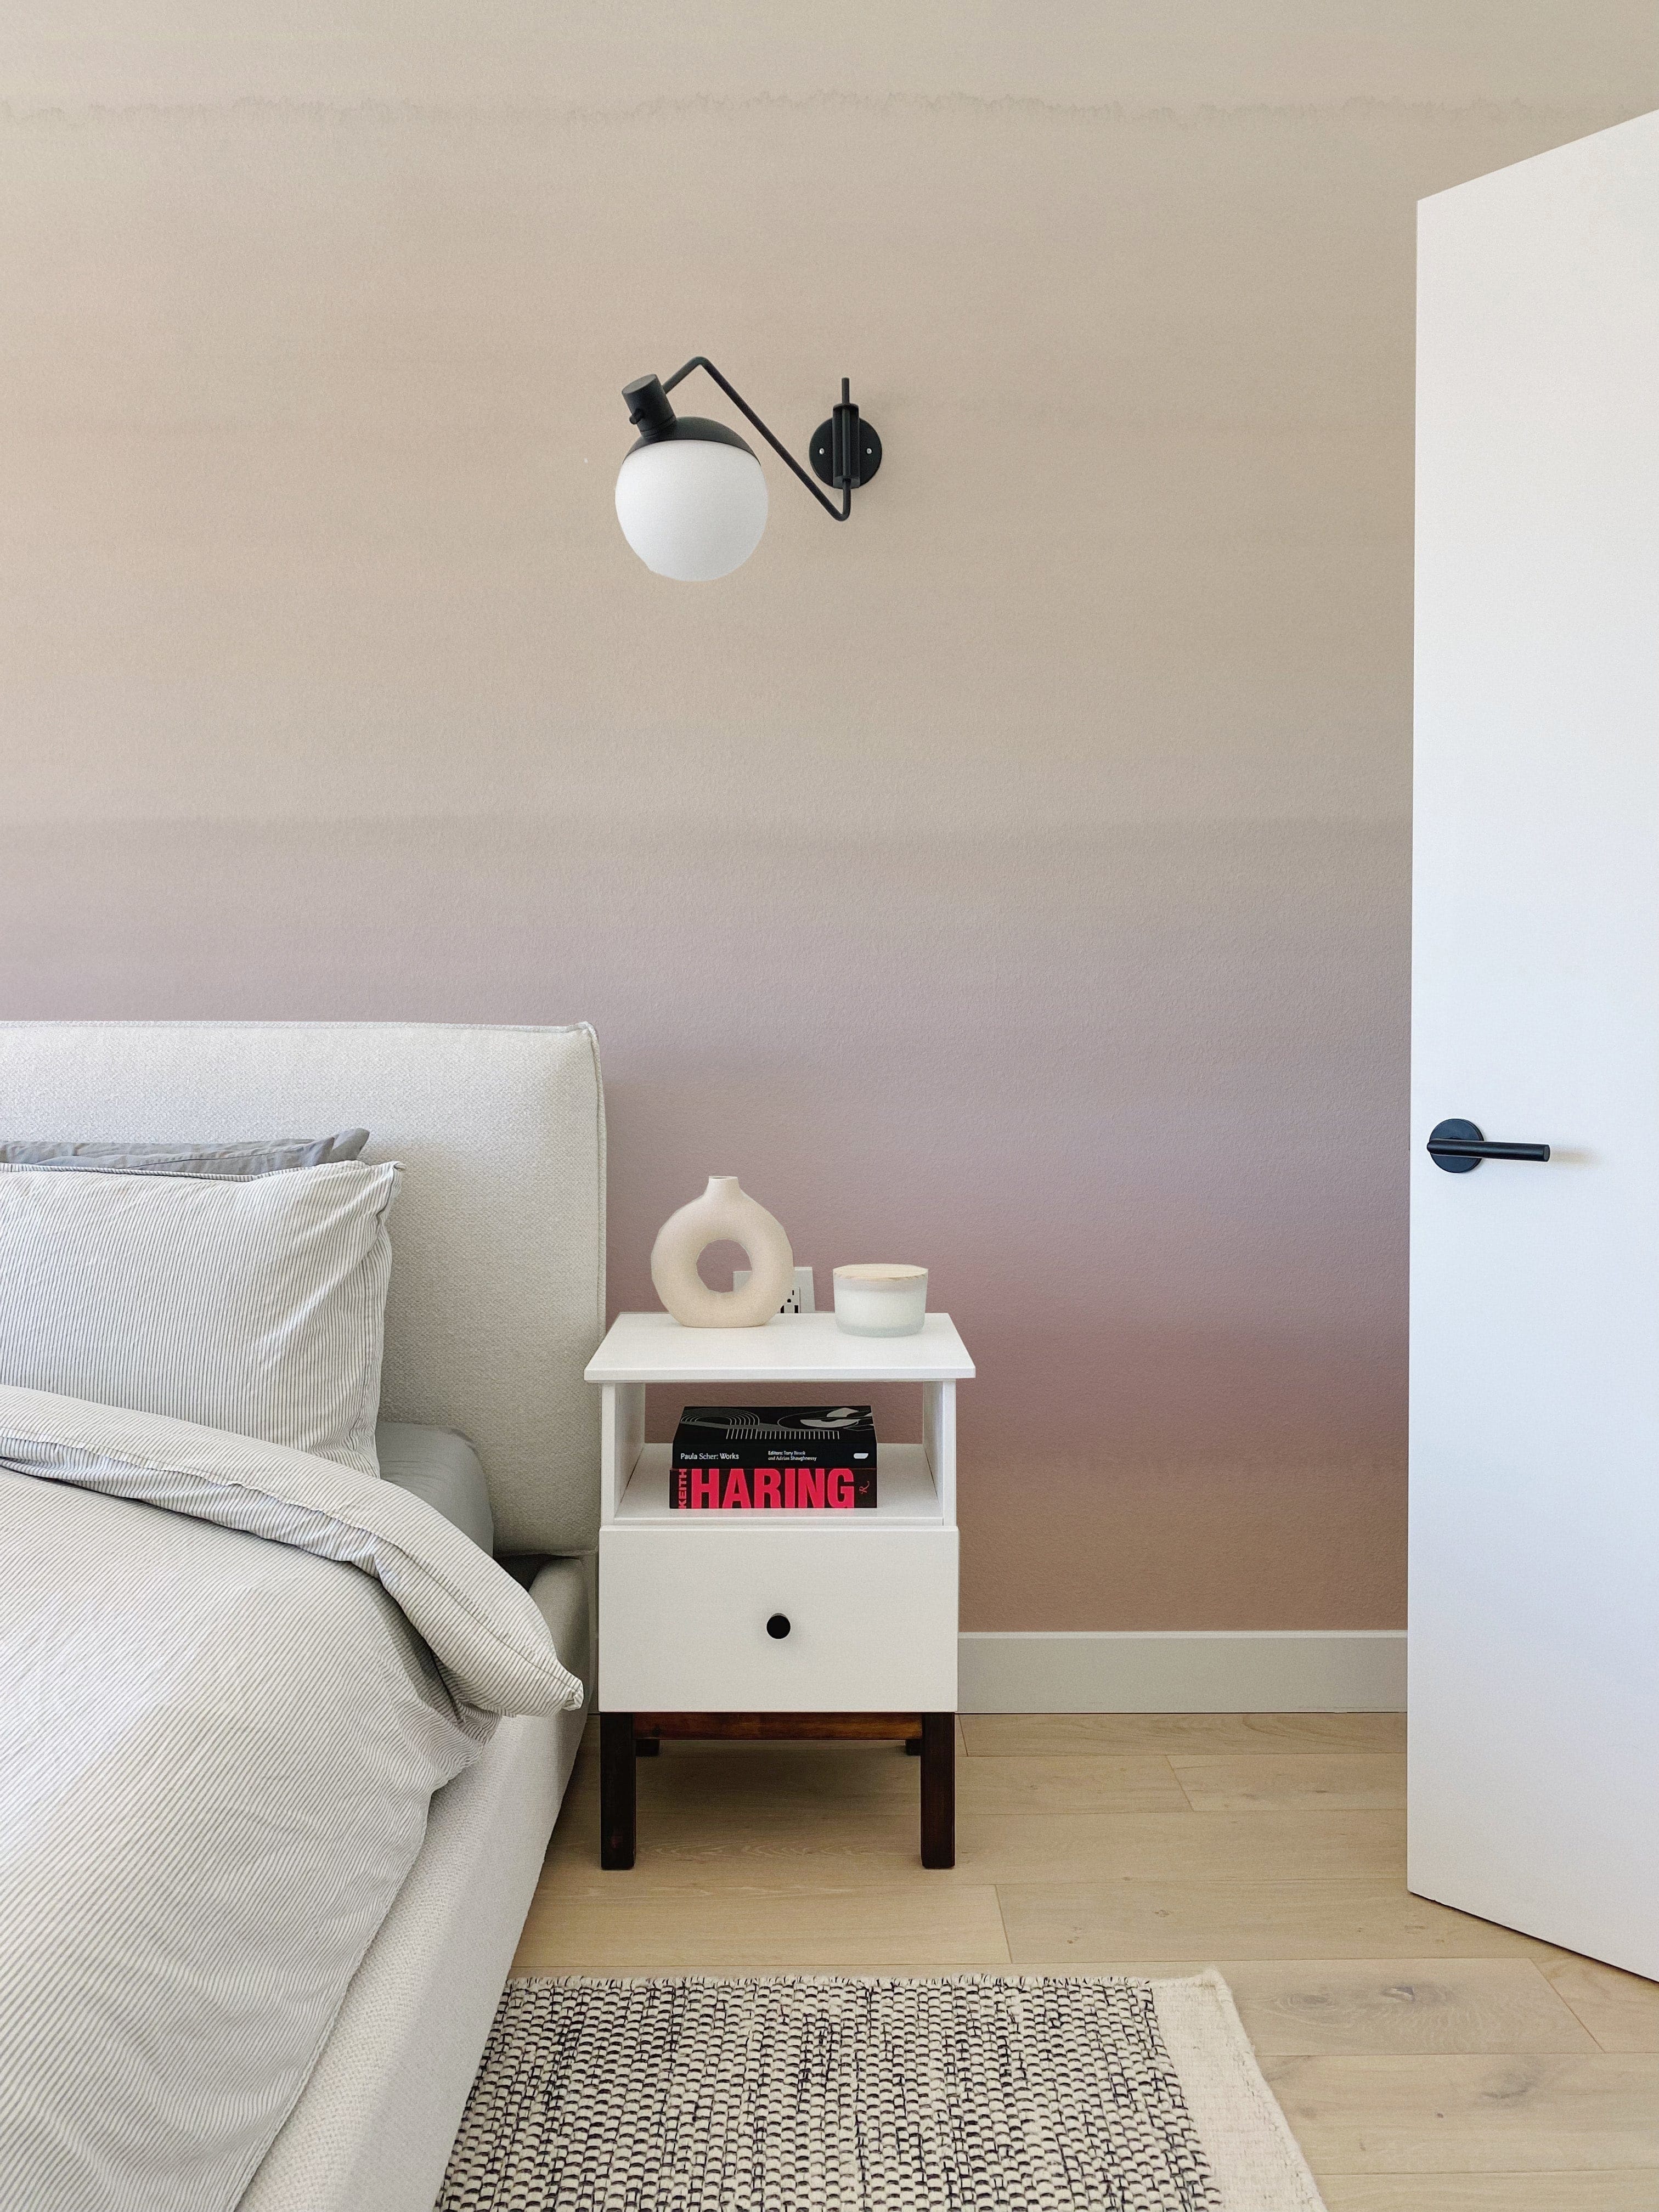 A modern bedroom featuring a wall covered in Blush Gradient Wallpaper with smooth transition from light beige at the top to a soft pink hue at the bottom. The scene is complemented by a white bedside table with books, a small vase, and a stylish black wall-mounted lamp.